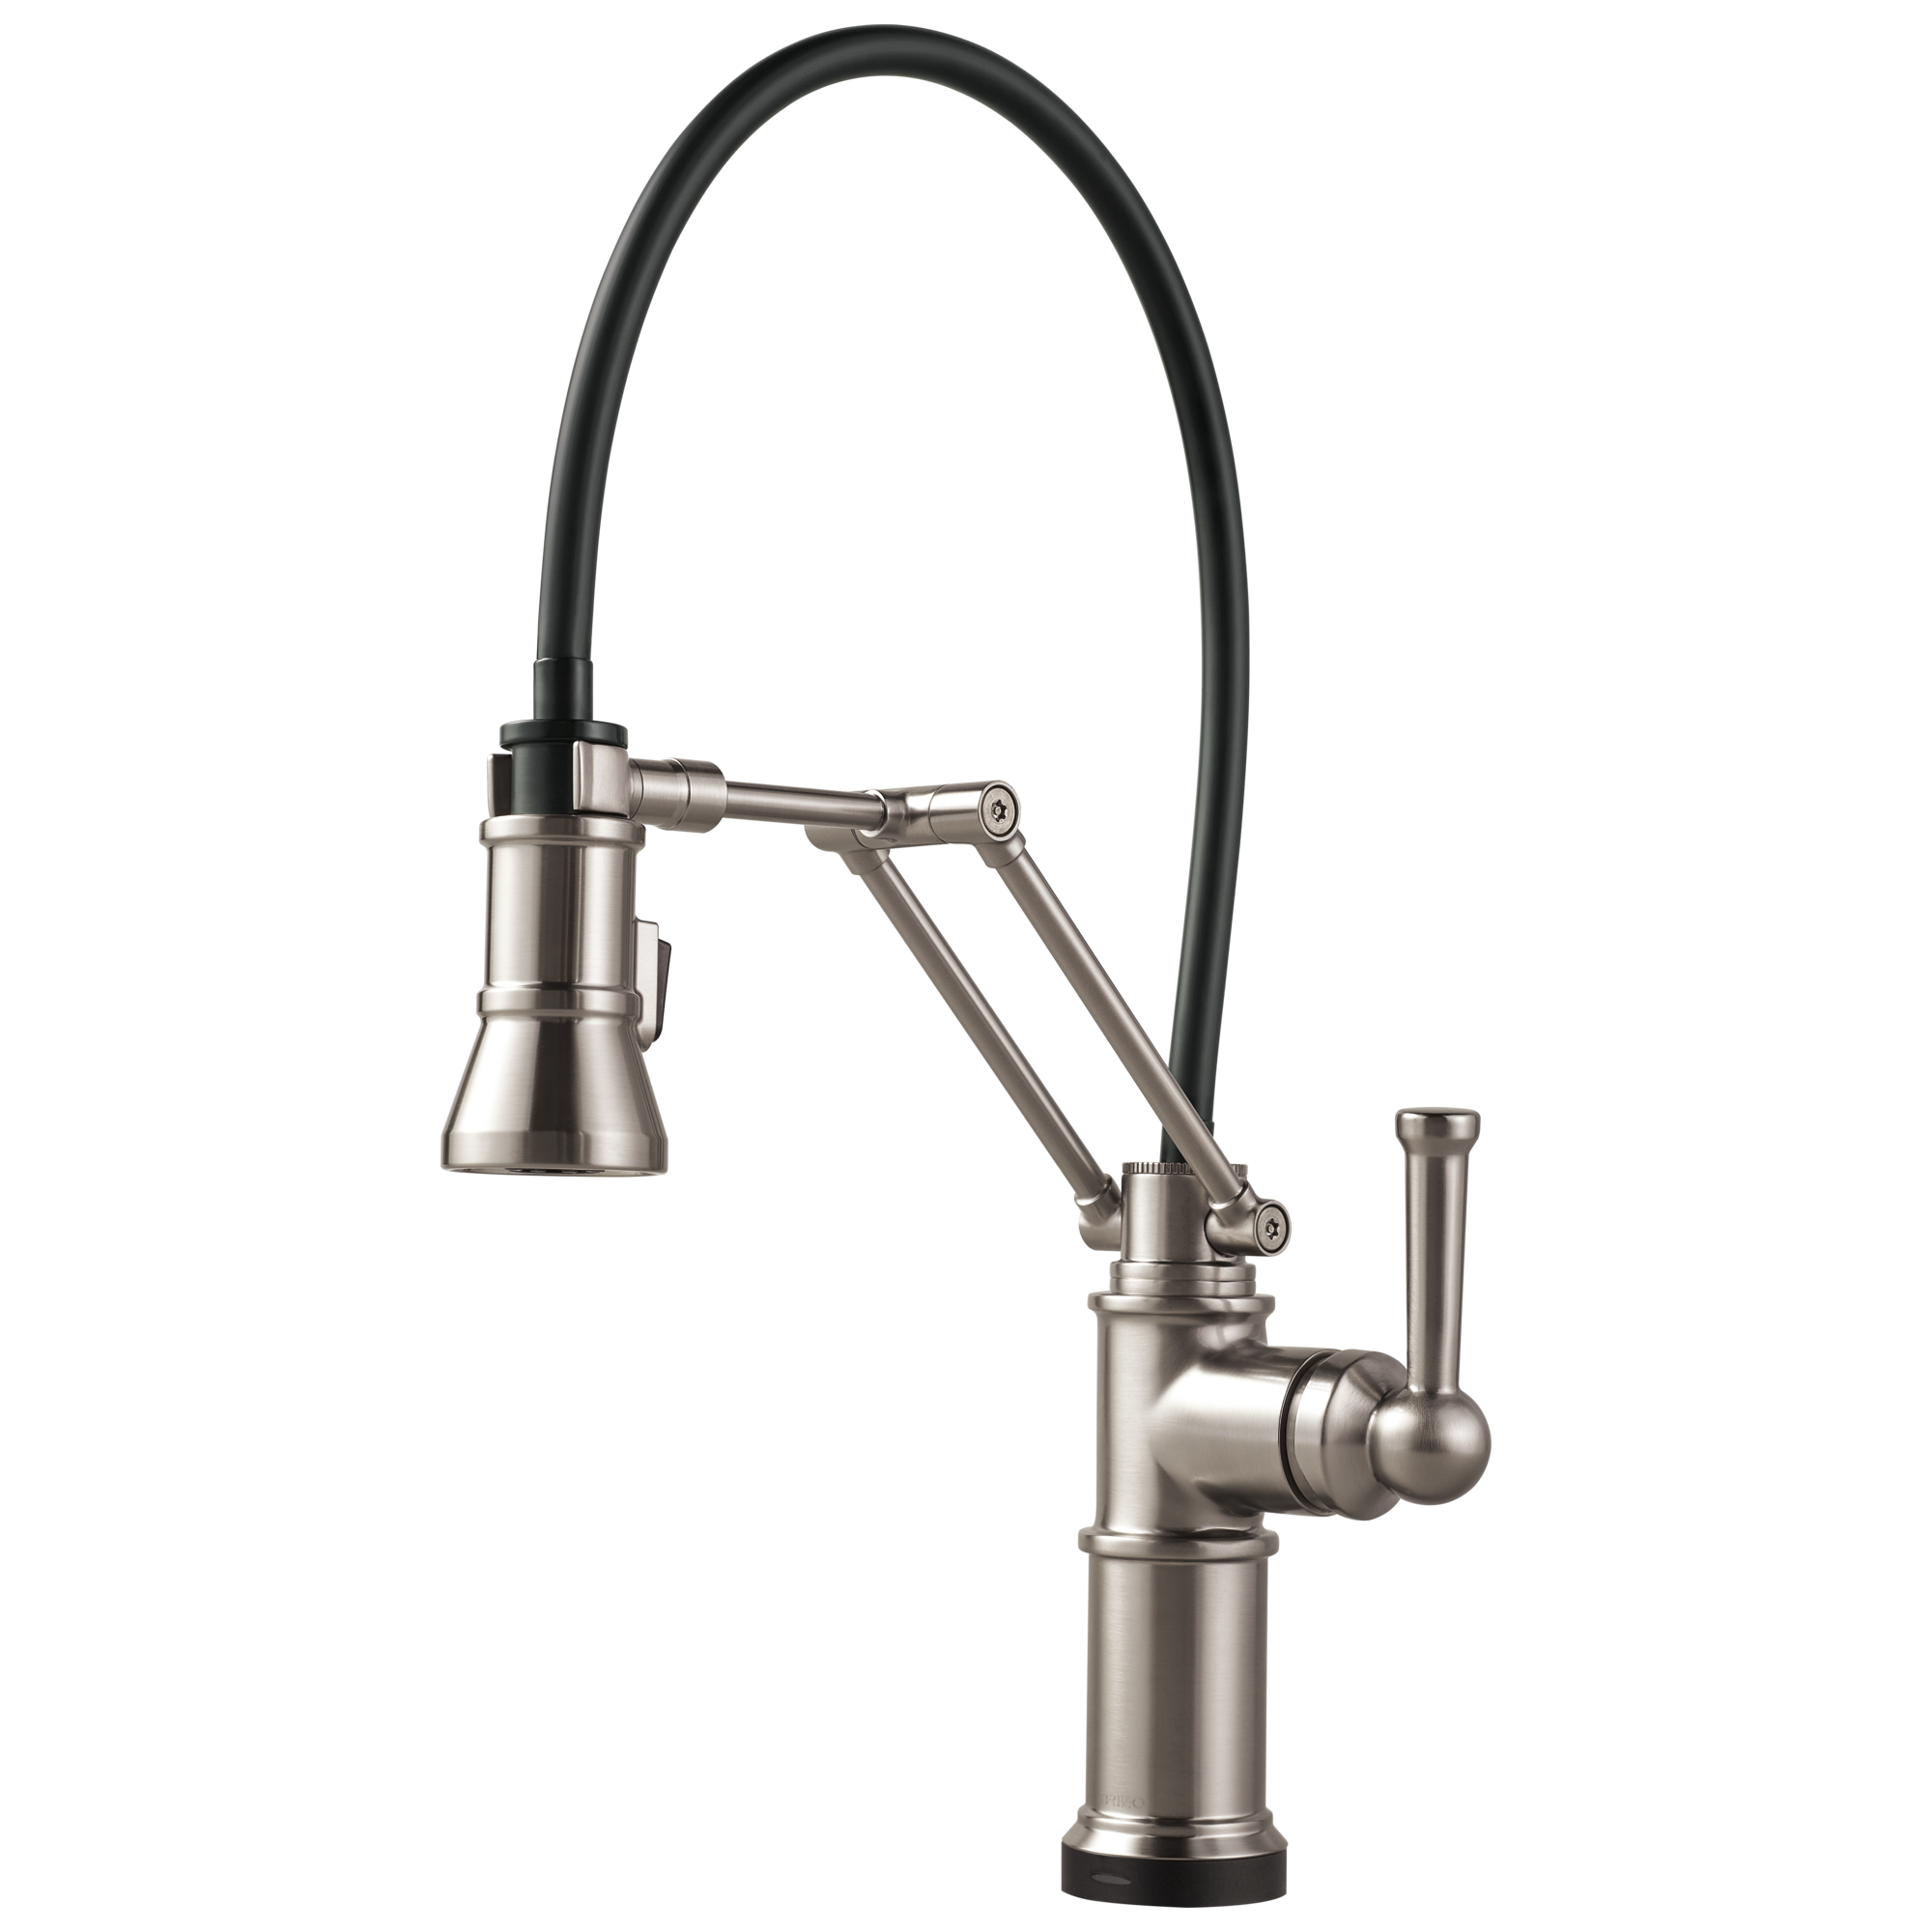 Brizo Artesso Single Handle Articulating Kitchen Kitchen Faucet with Smart Touch Technology